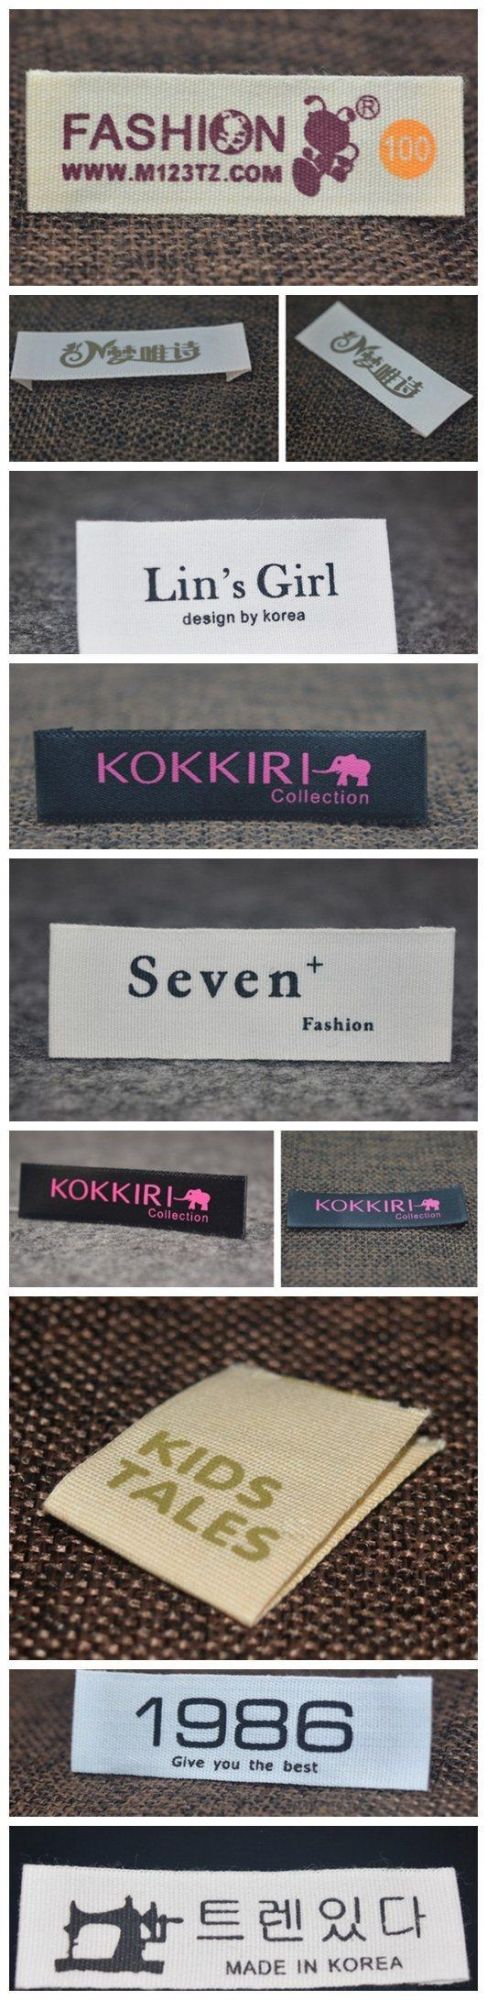 Clothing Garment Polyester Main Woven Label